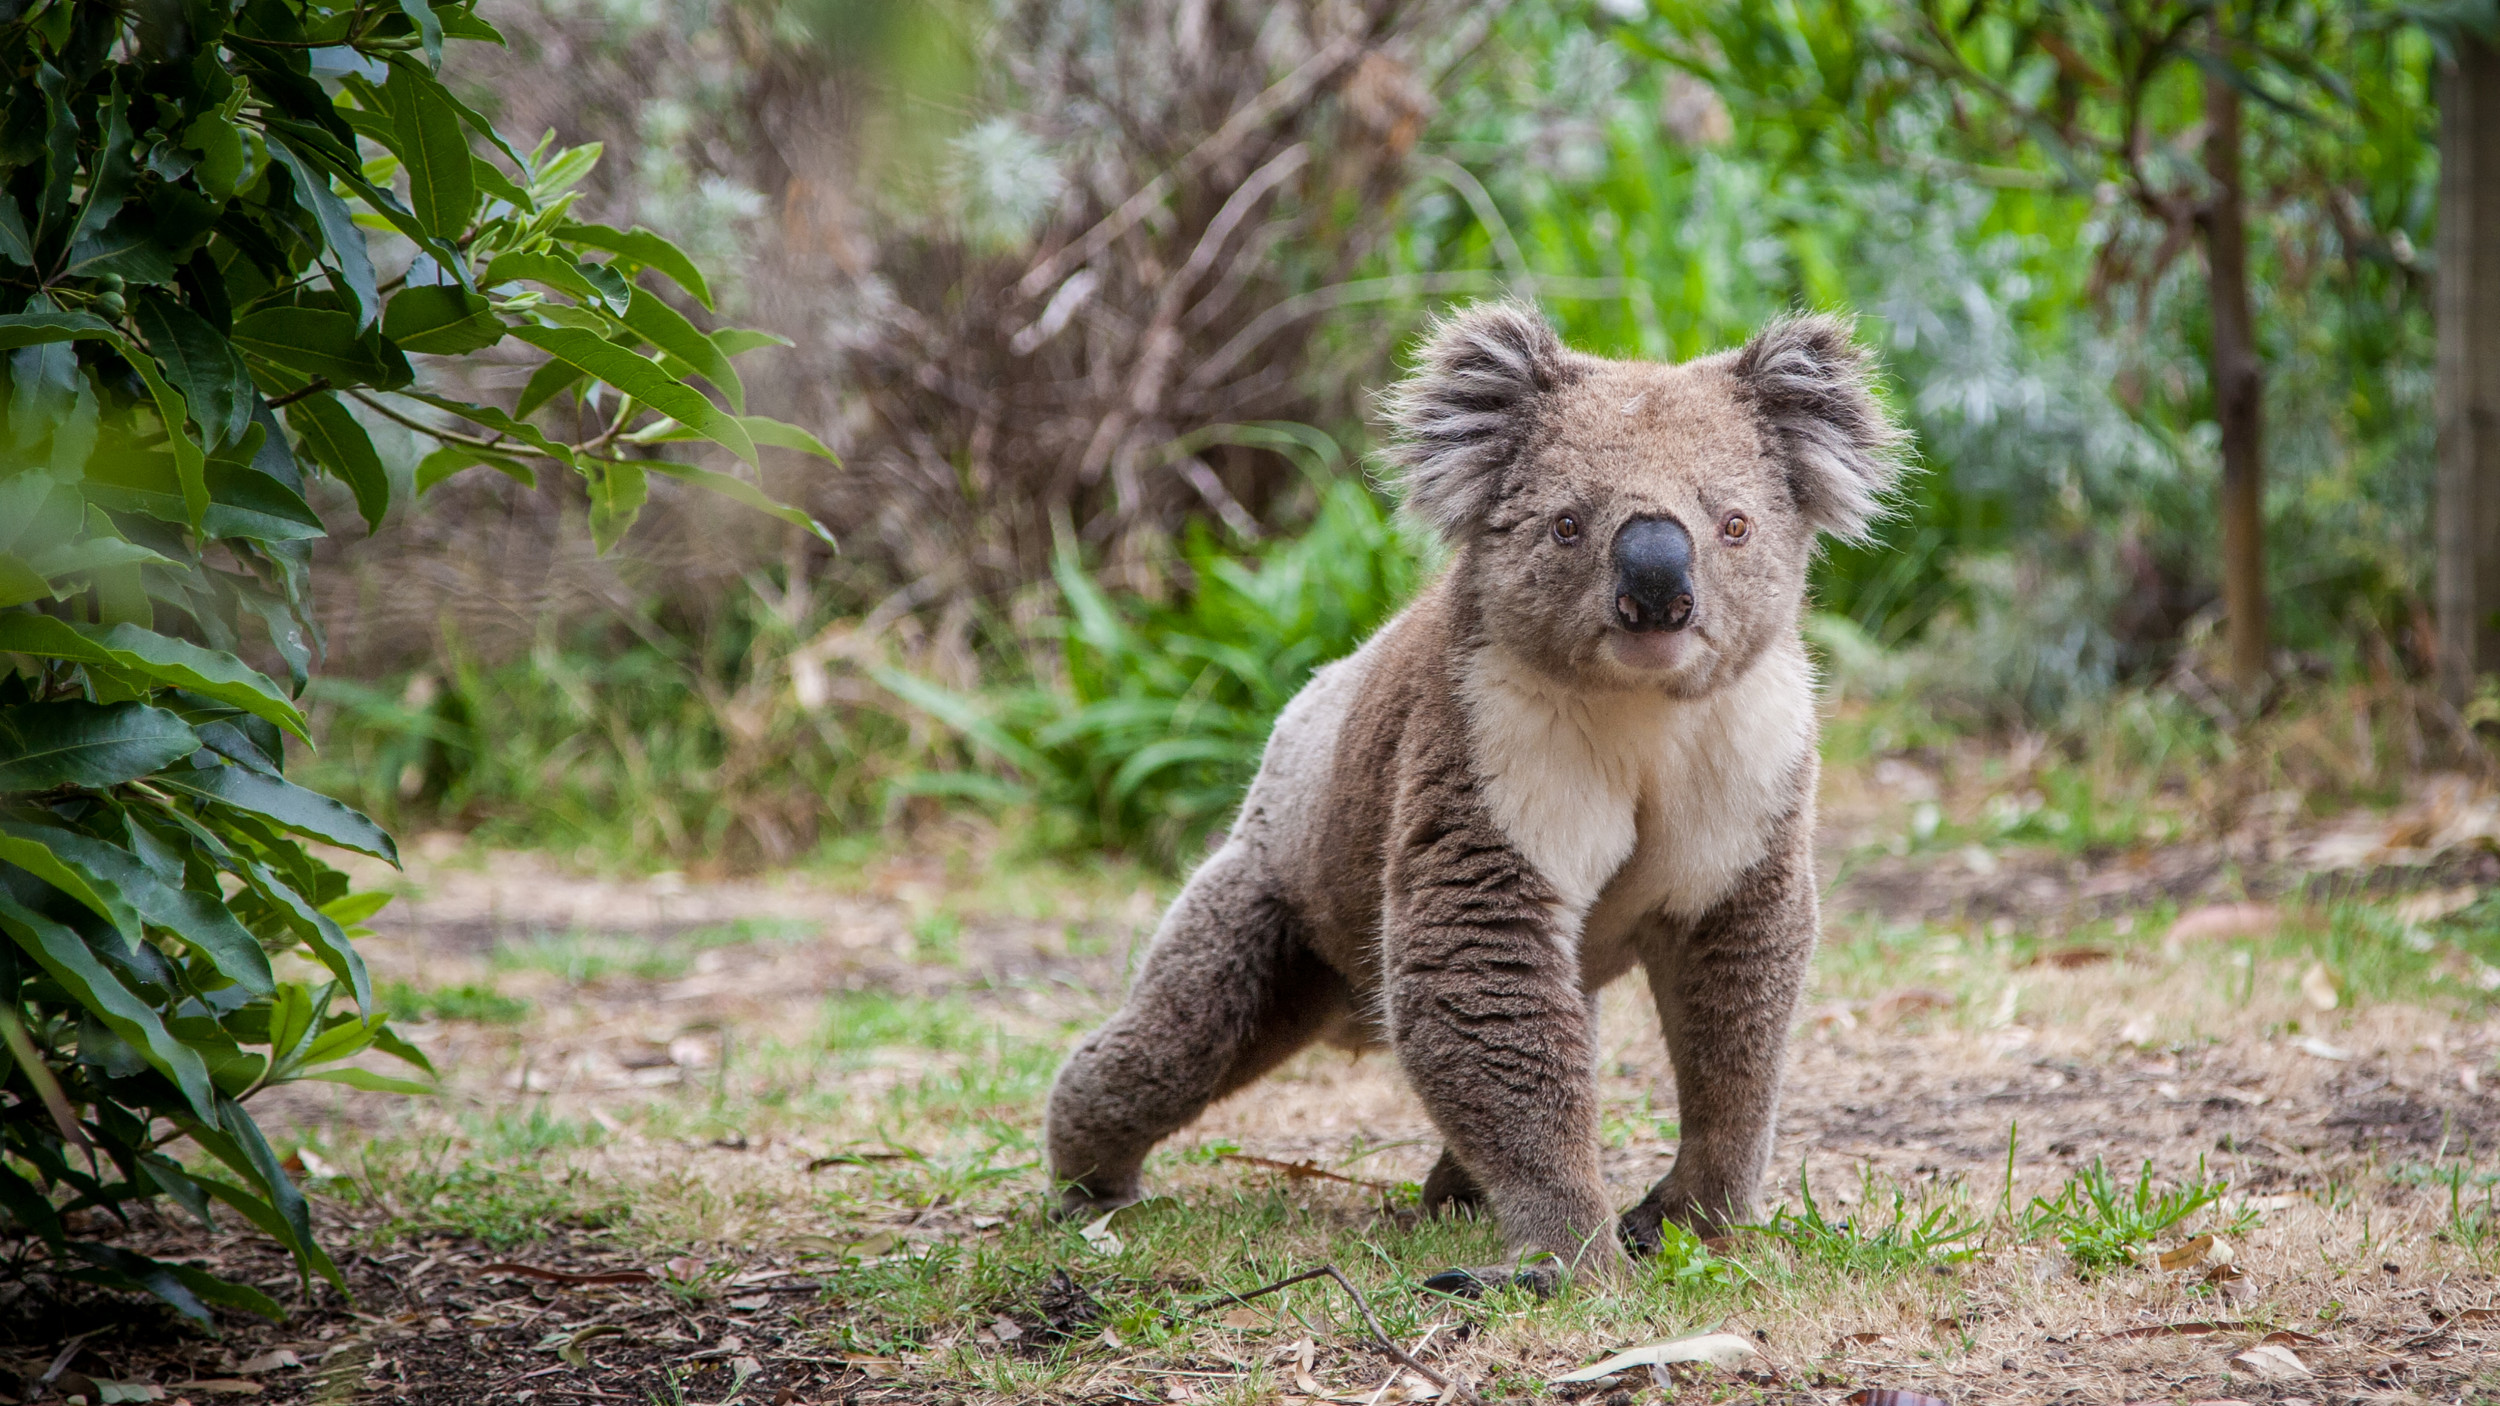 End Your Work Week By Video-Conferencing With Koalas for Save the Koala Day